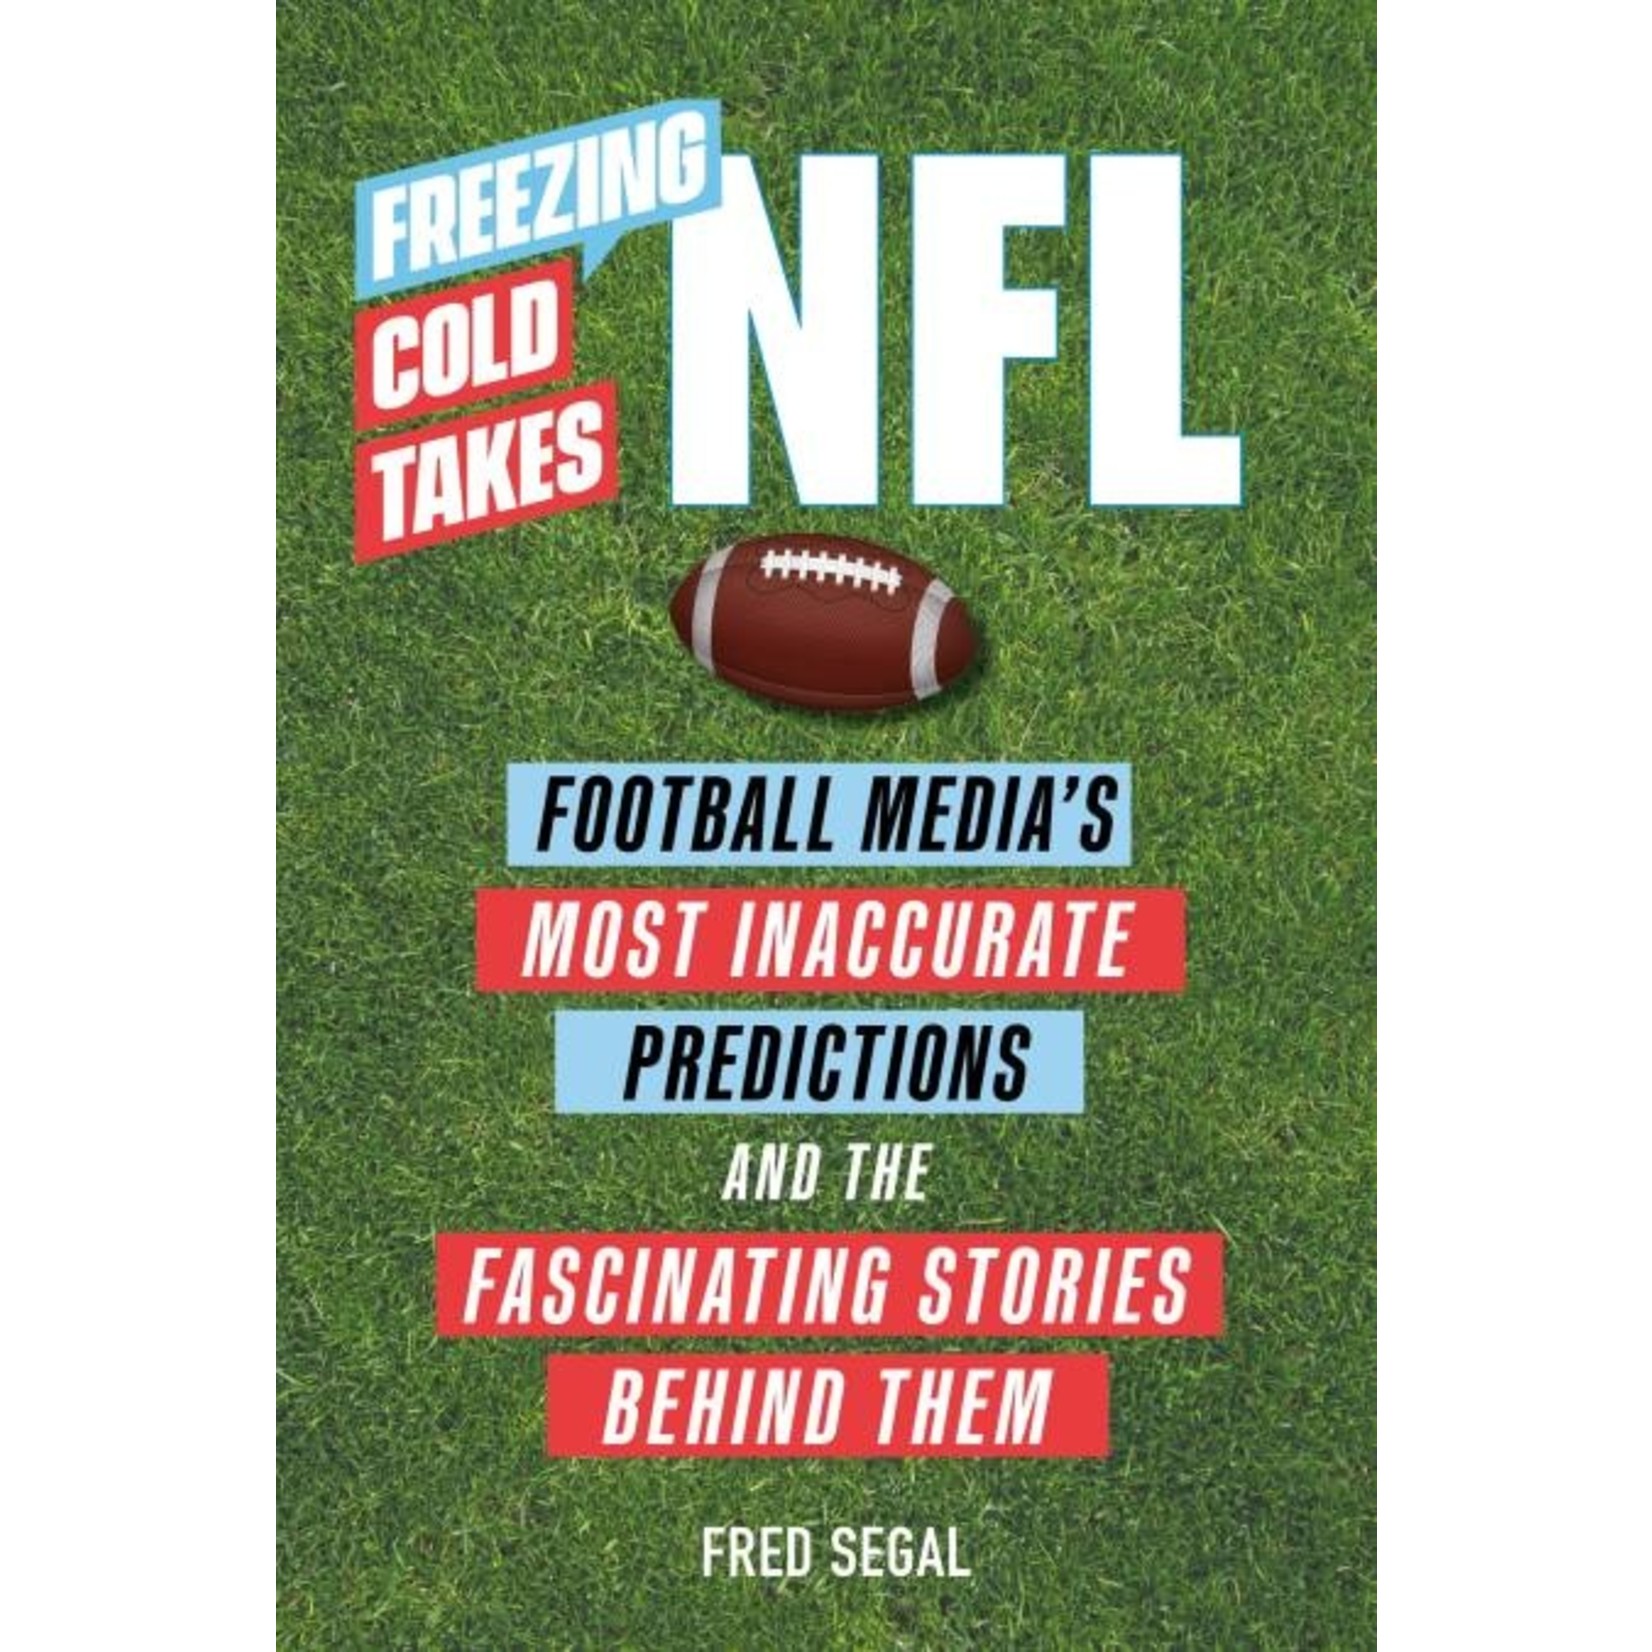 Hachette Book Group Freezing Cold Takes: NFL